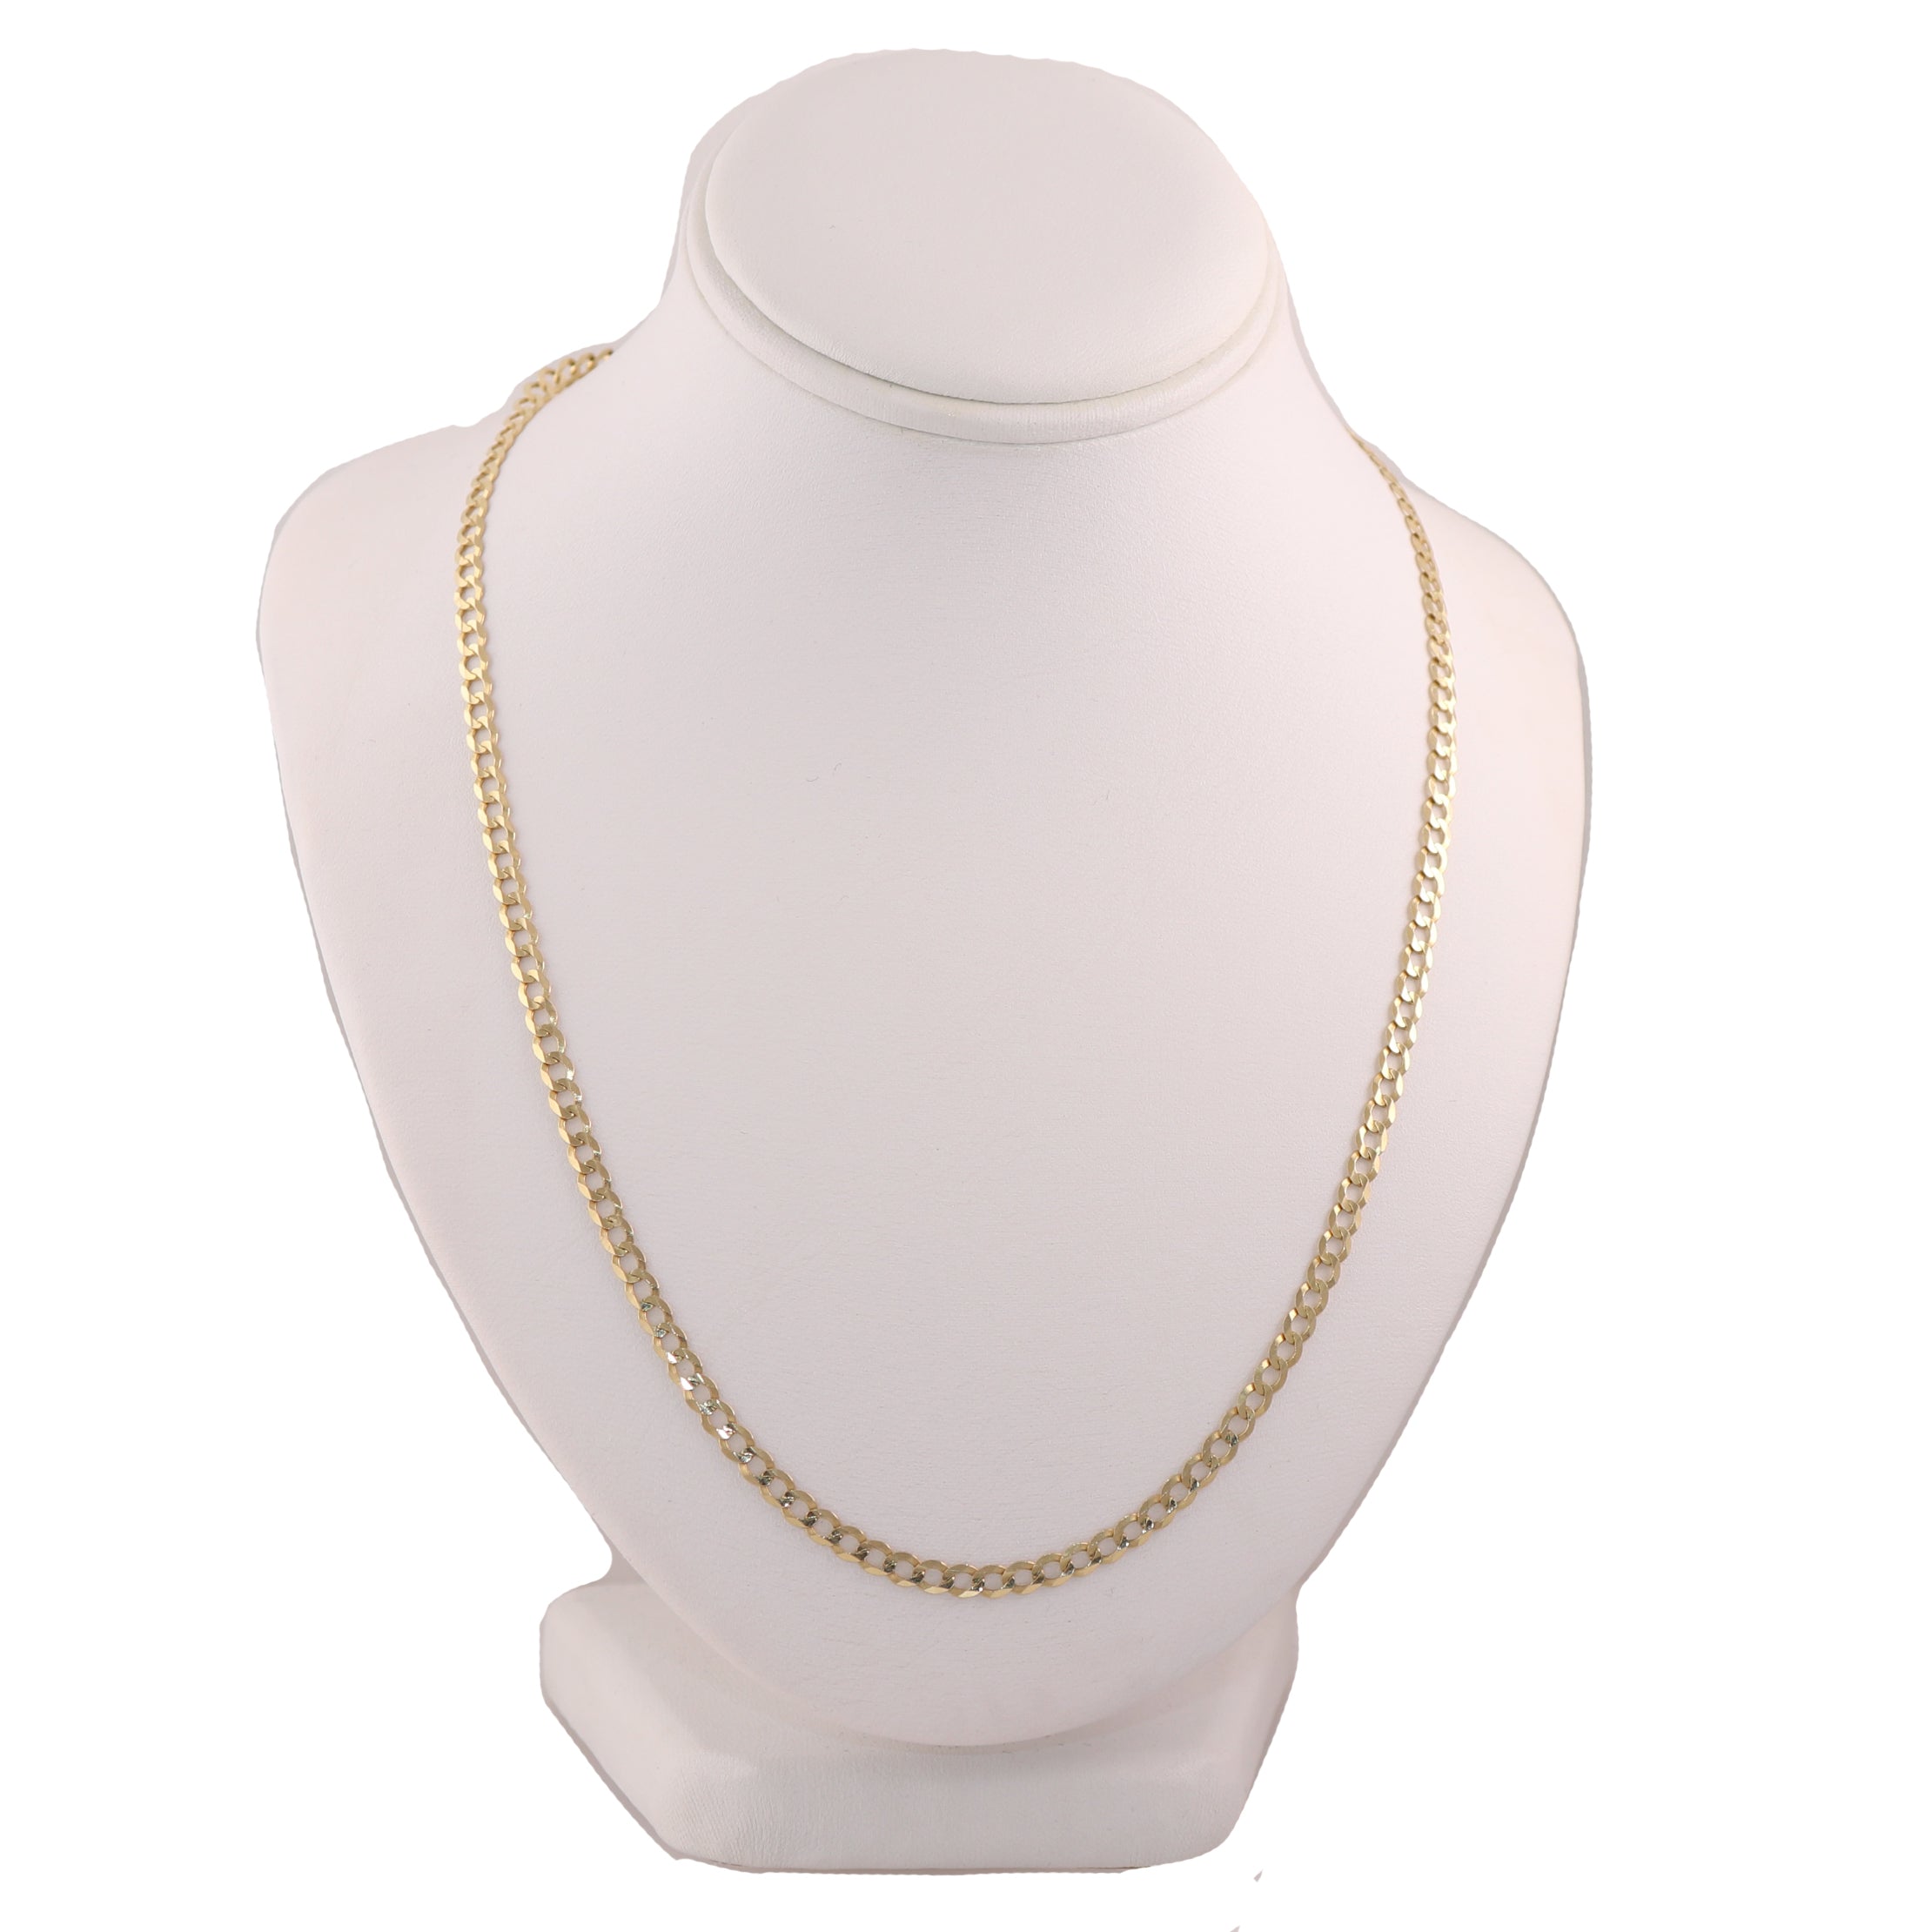 Modern 8.38g 14k Yellow Gold Cuban Curb Link 22" Chain Necklace